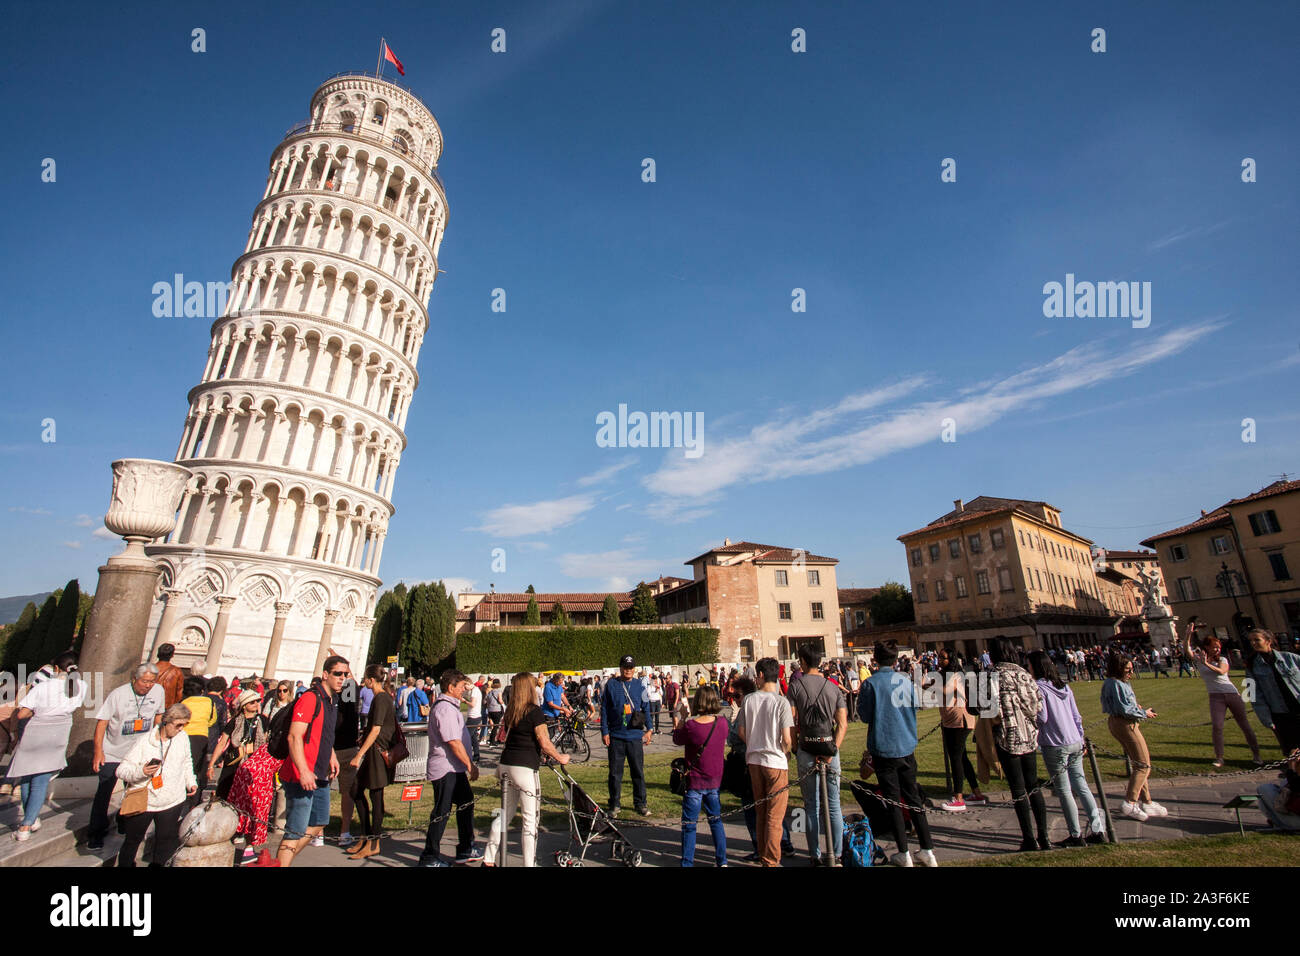 Pisa, Pisa Province, Tuscany, Italy. Campo dei Miracoli, or Field of Miracles. Also known as the Piazza del Duomo. The cathedral, or Duomo, and its be Stock Photo